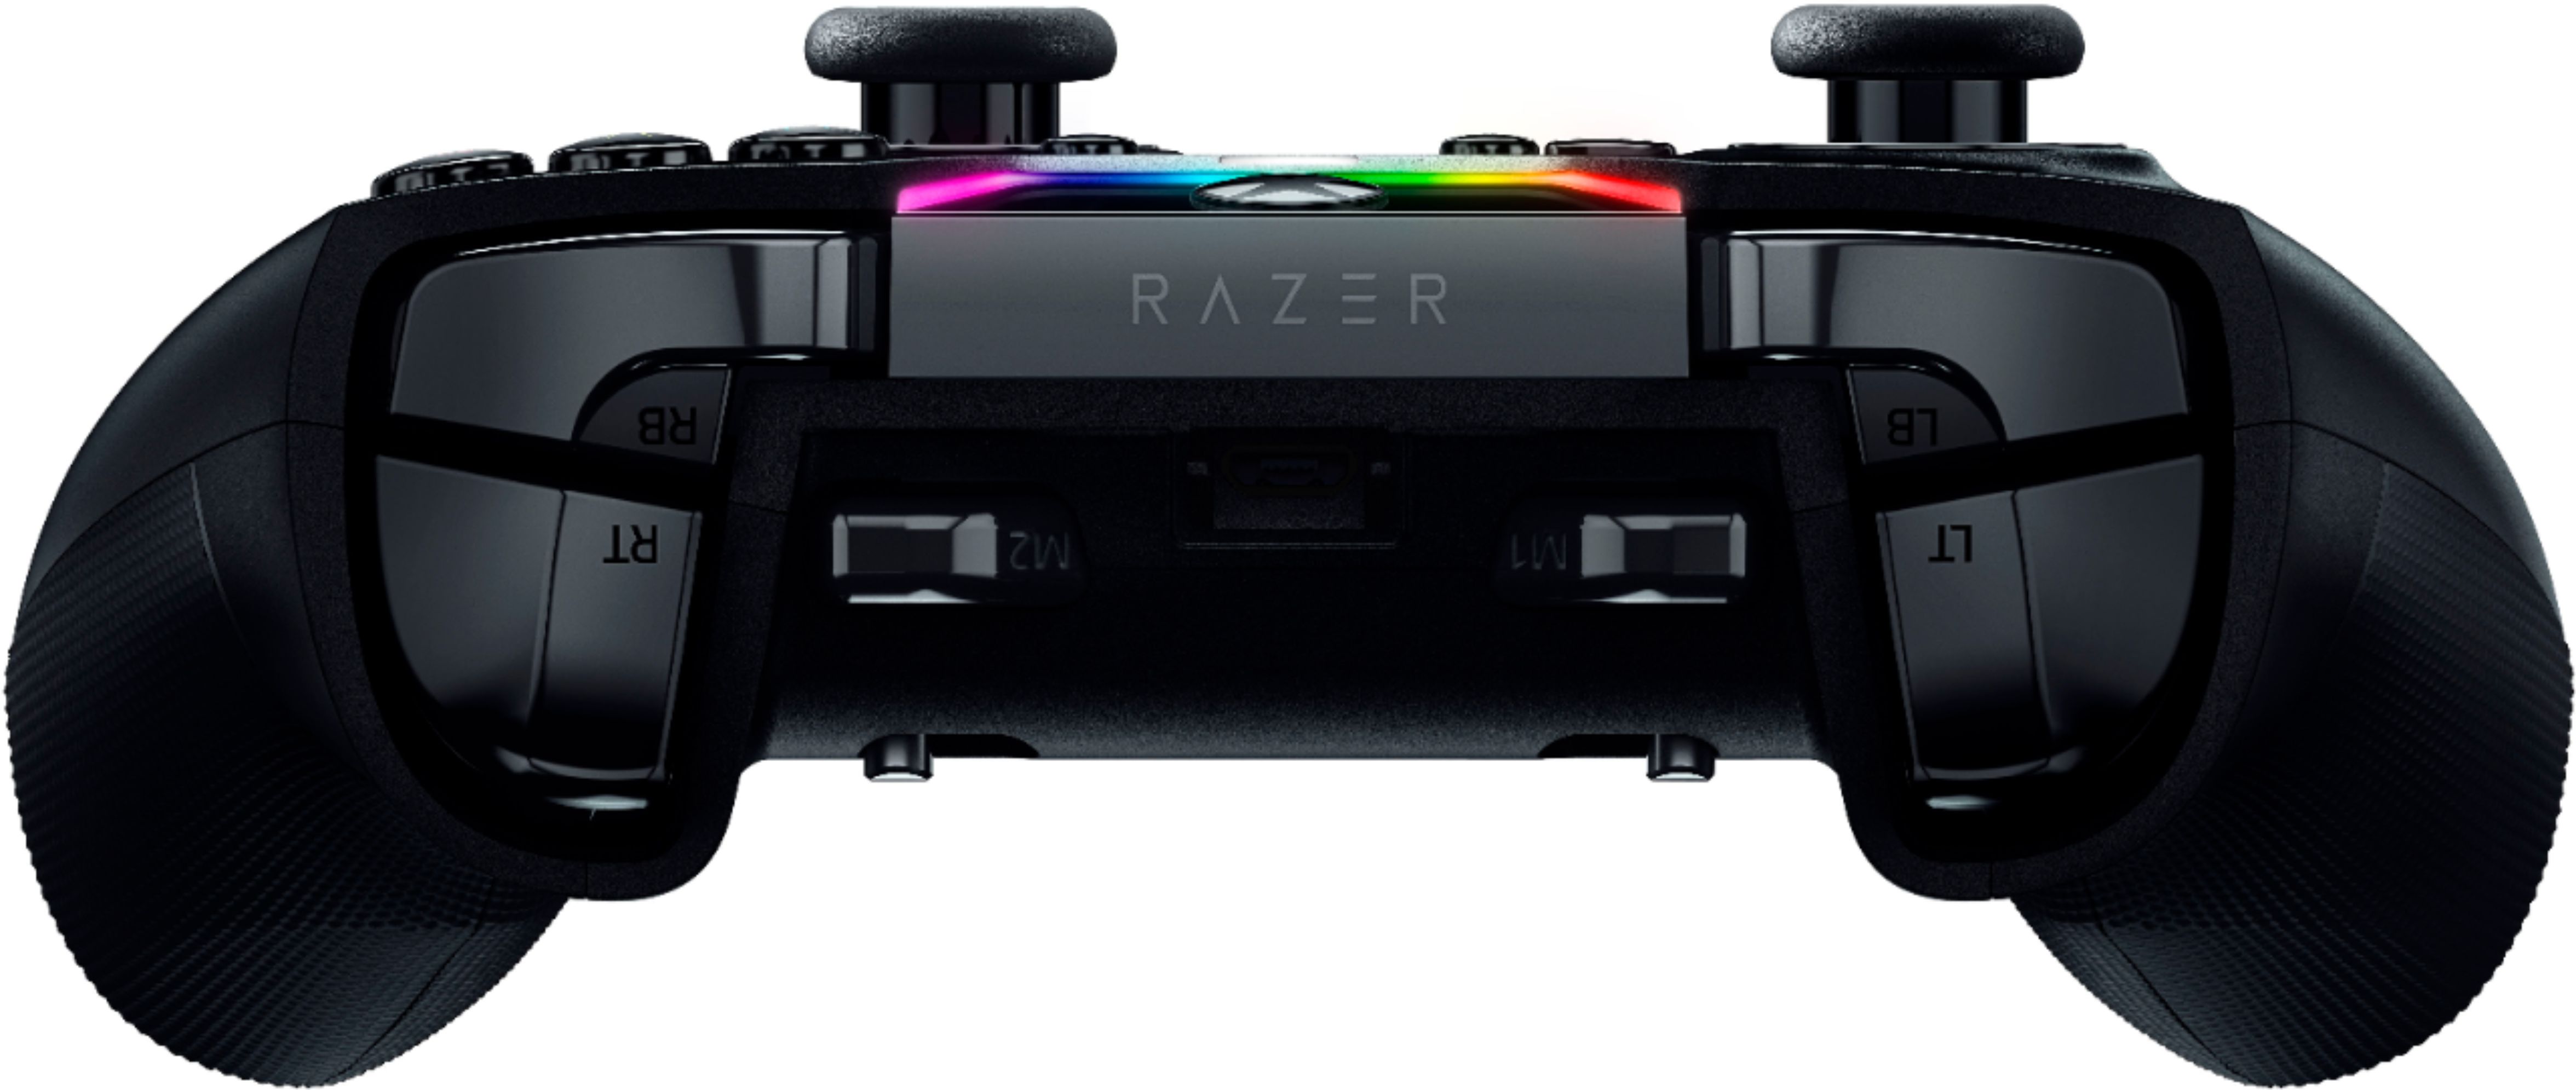 razer wolverine tournament edition gaming controller for xbox one